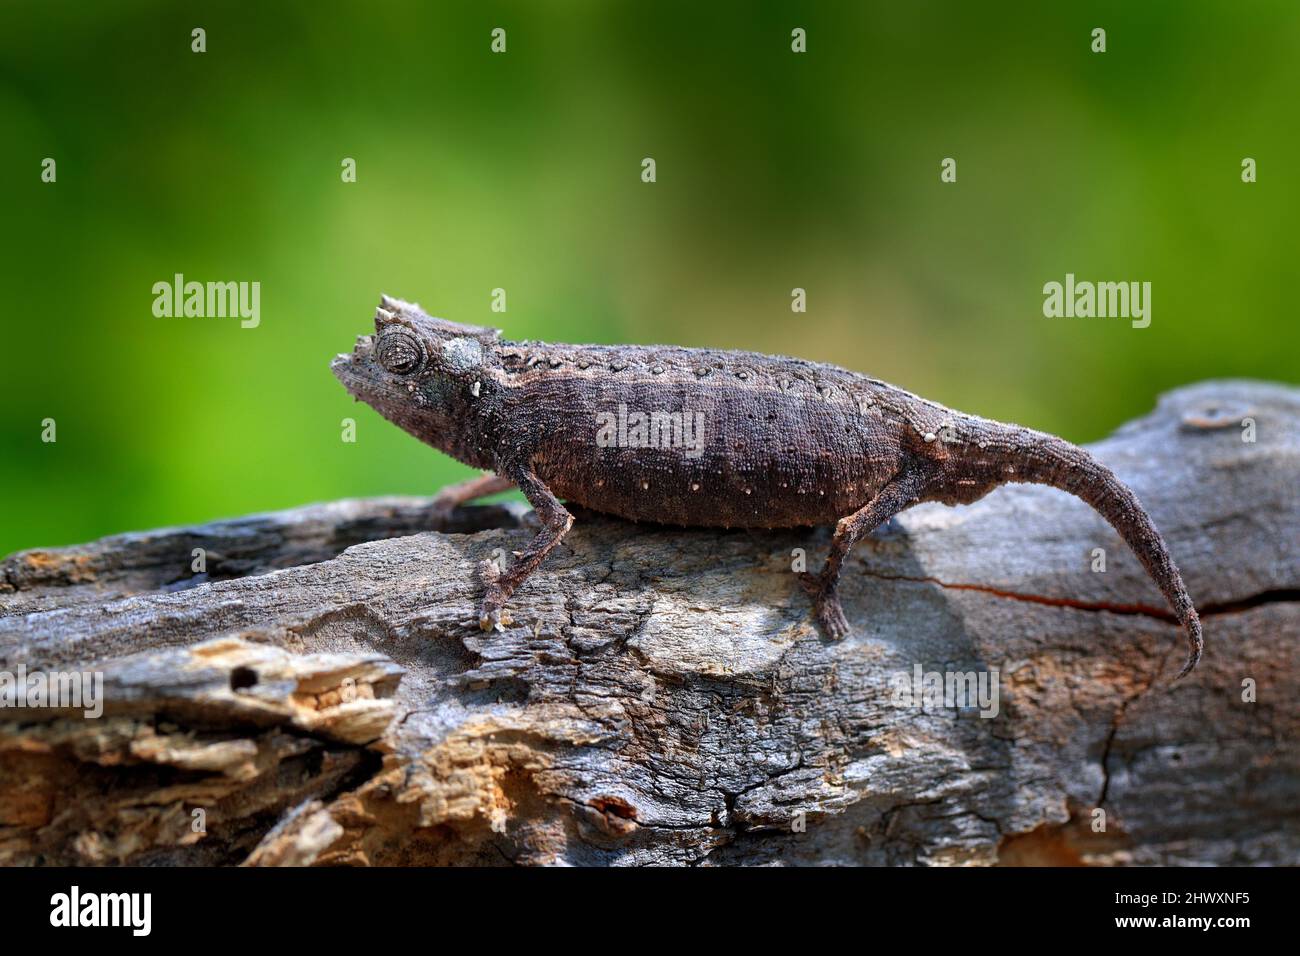 Brookesia ebenaui, Northern Leaf Chameleonsitting on the branch in forest habitat. Exotic beautiful endemic green reptile with long tail from Madagasc Stock Photo